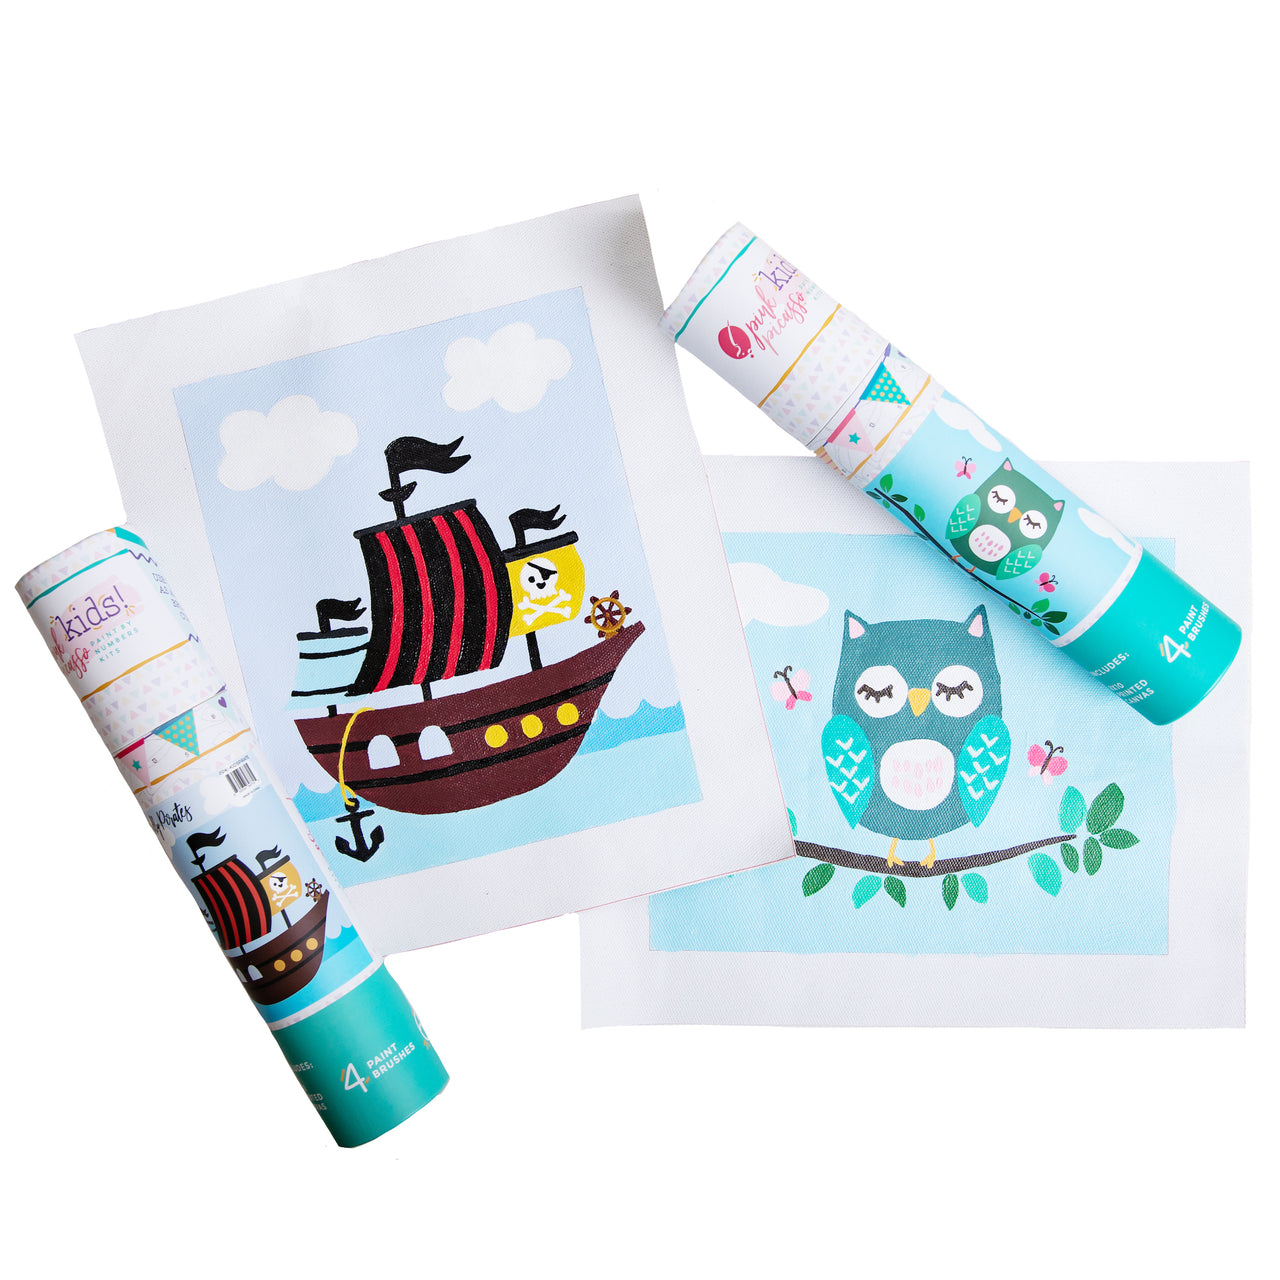 Friendly Pirates - Pink Picasso Kits